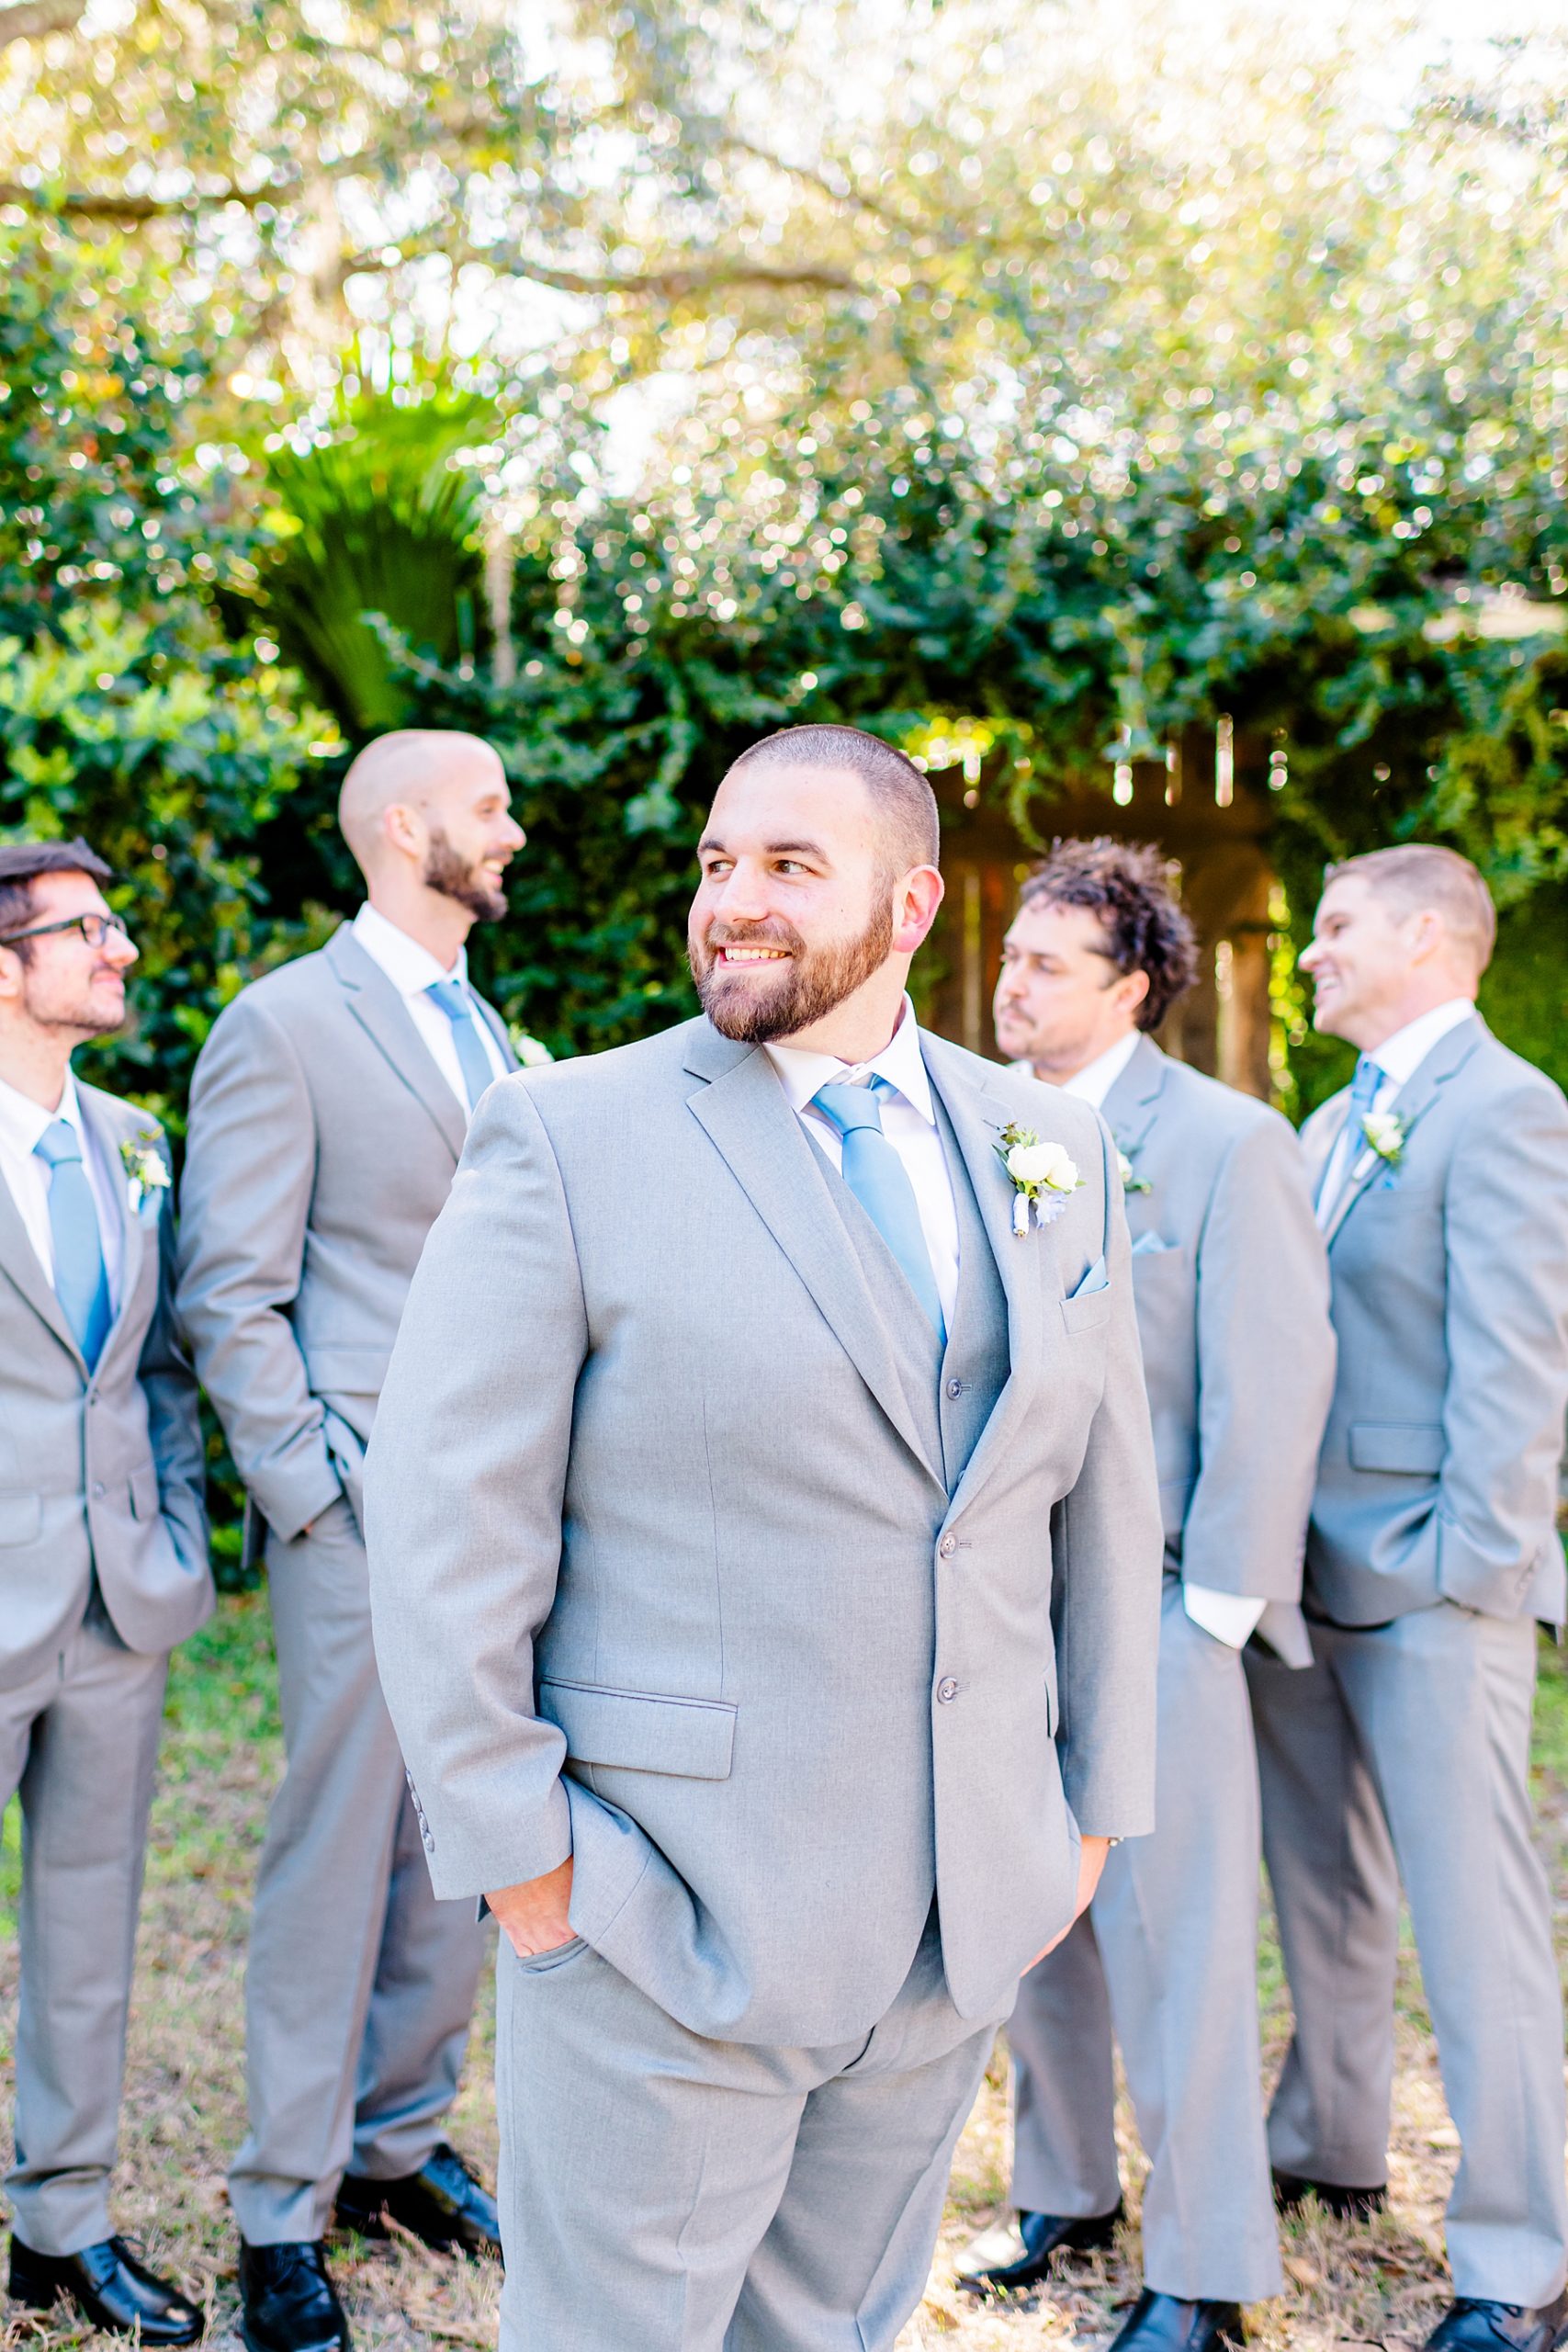 Mens Wearhouse Tux | The Delamater House Wedding | Chynna Pacheco Photography-361